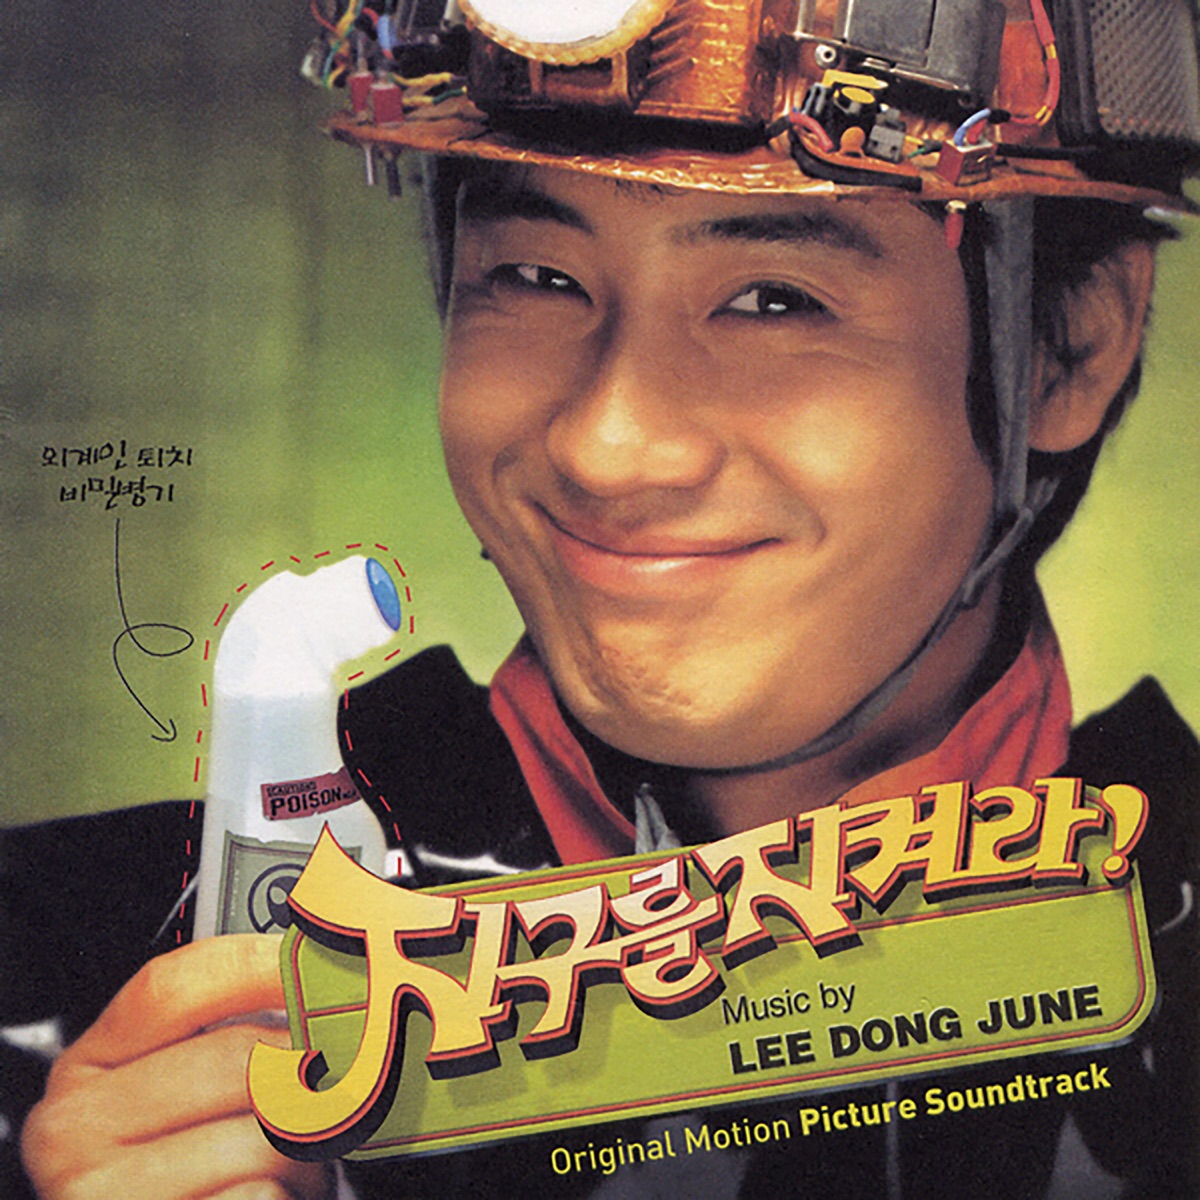 Lee Dong June – Save the Green Planet! (Original Movie Soundtrack)